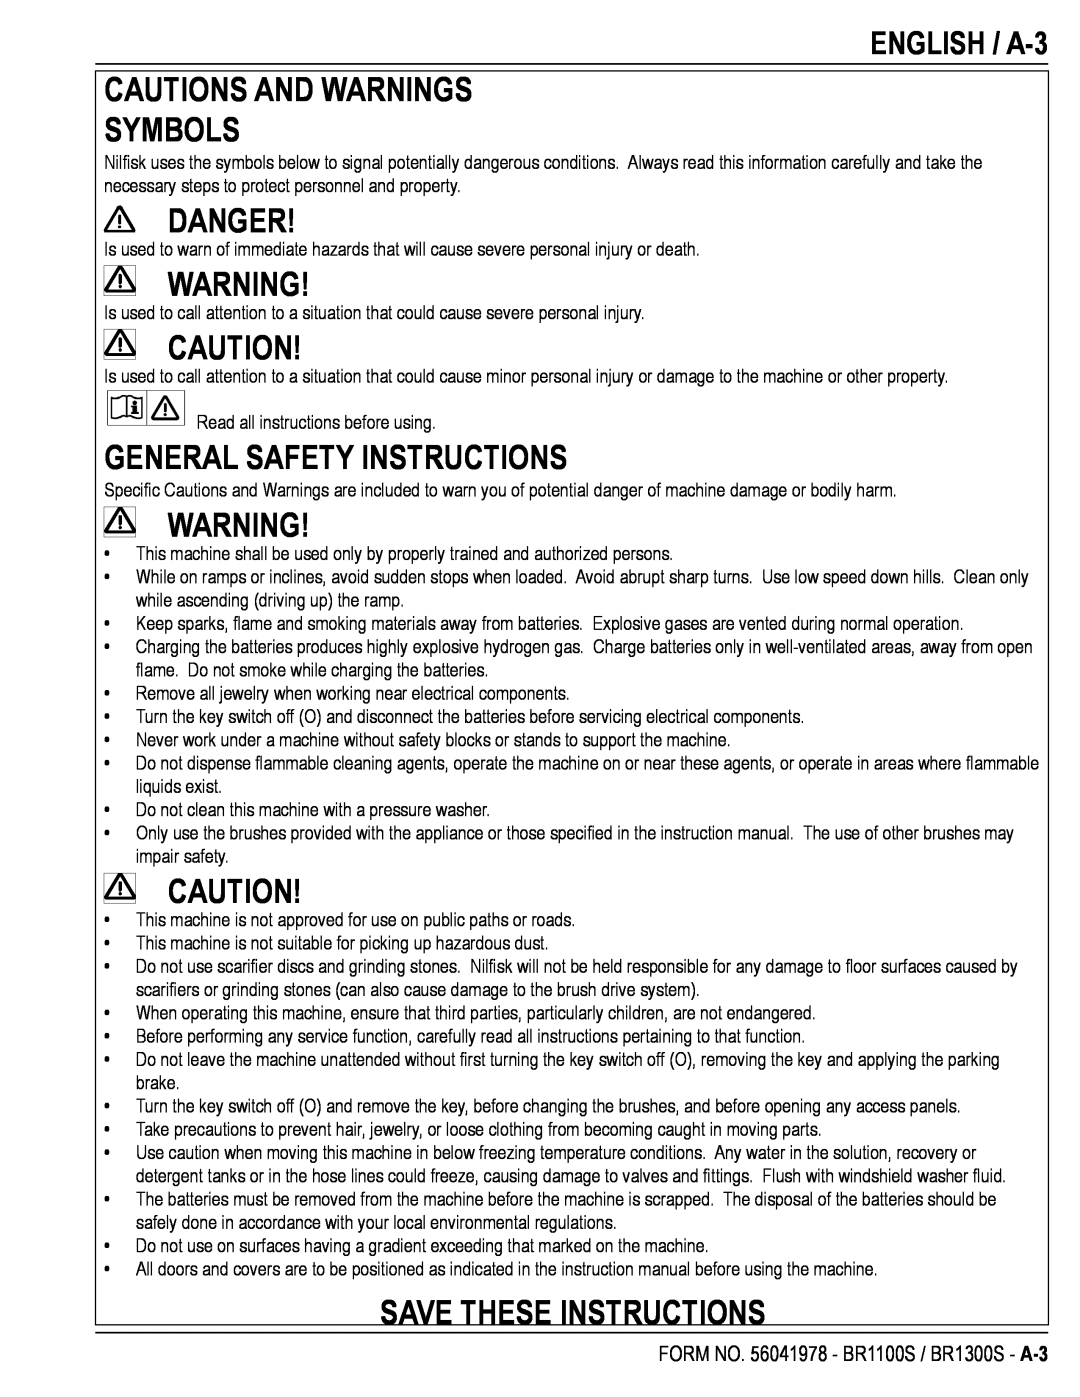 Nilfisk-Advance America BR1100S manual Cautions And Warnings Symbols, Danger, General Safety Instructions, ENGLISH / A-3 